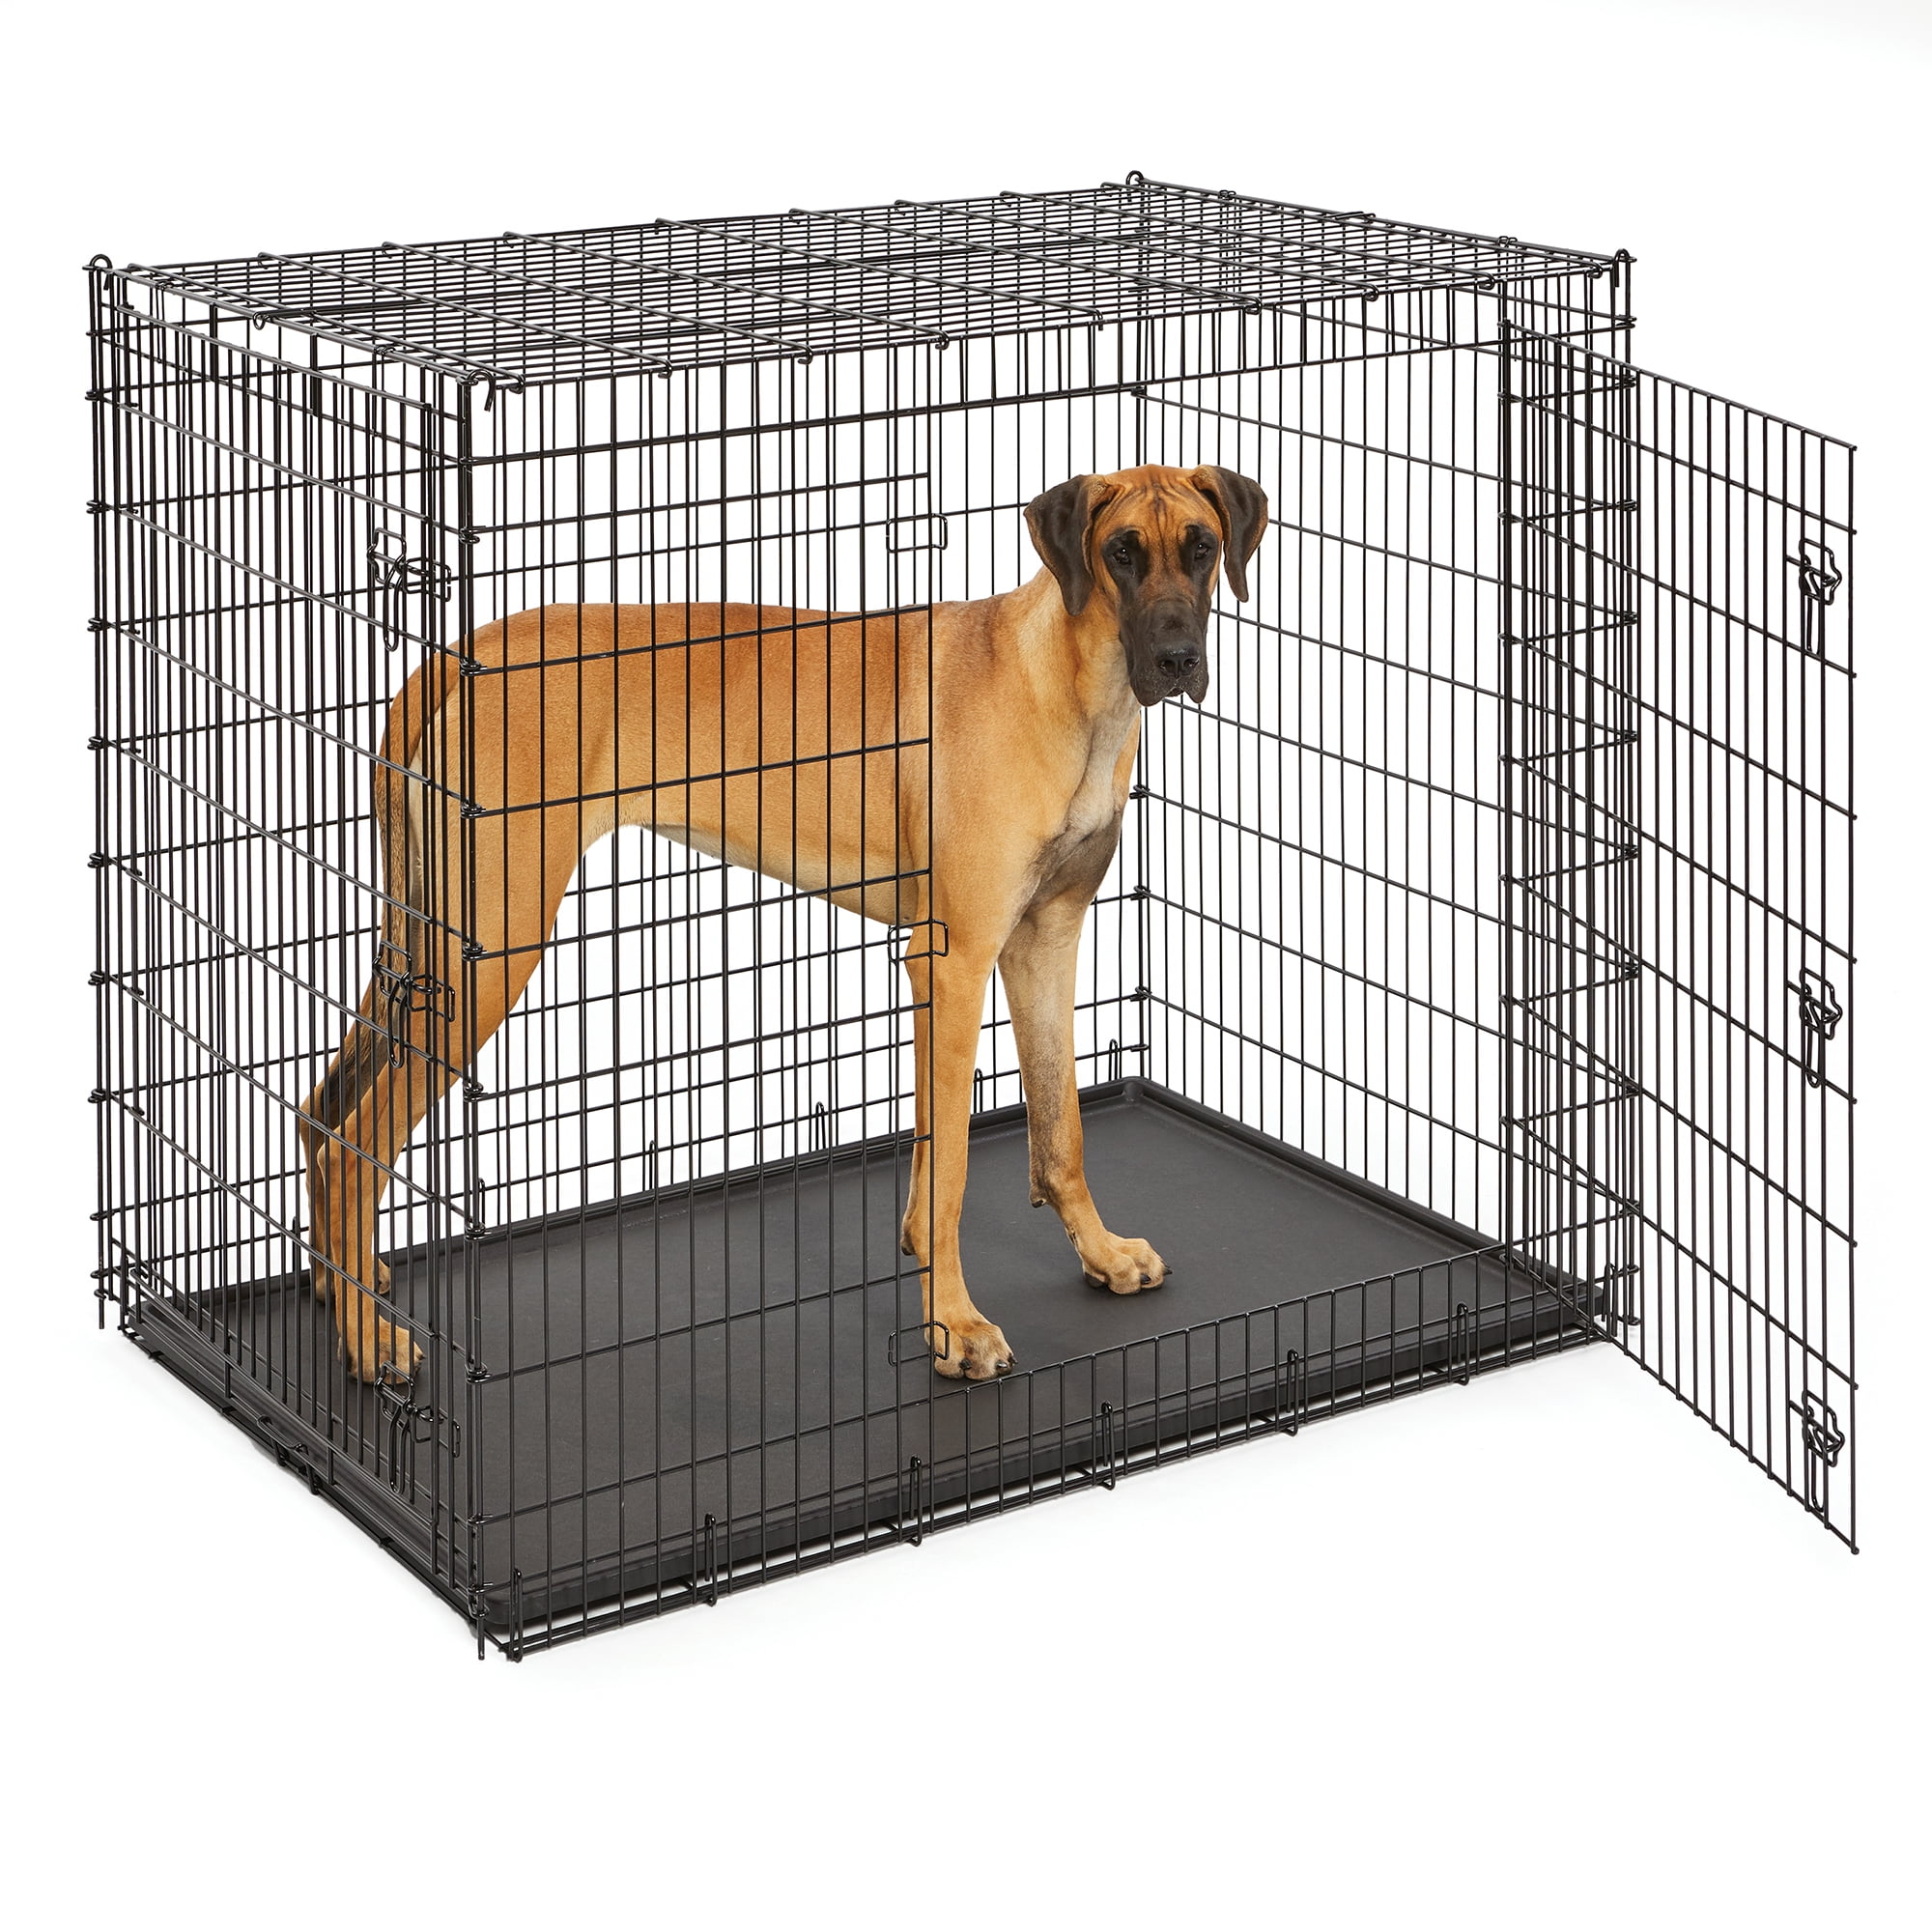 MidWest Extra Large Dog Breed (Great Dane) Heavy Duty Metal Dog Crate w